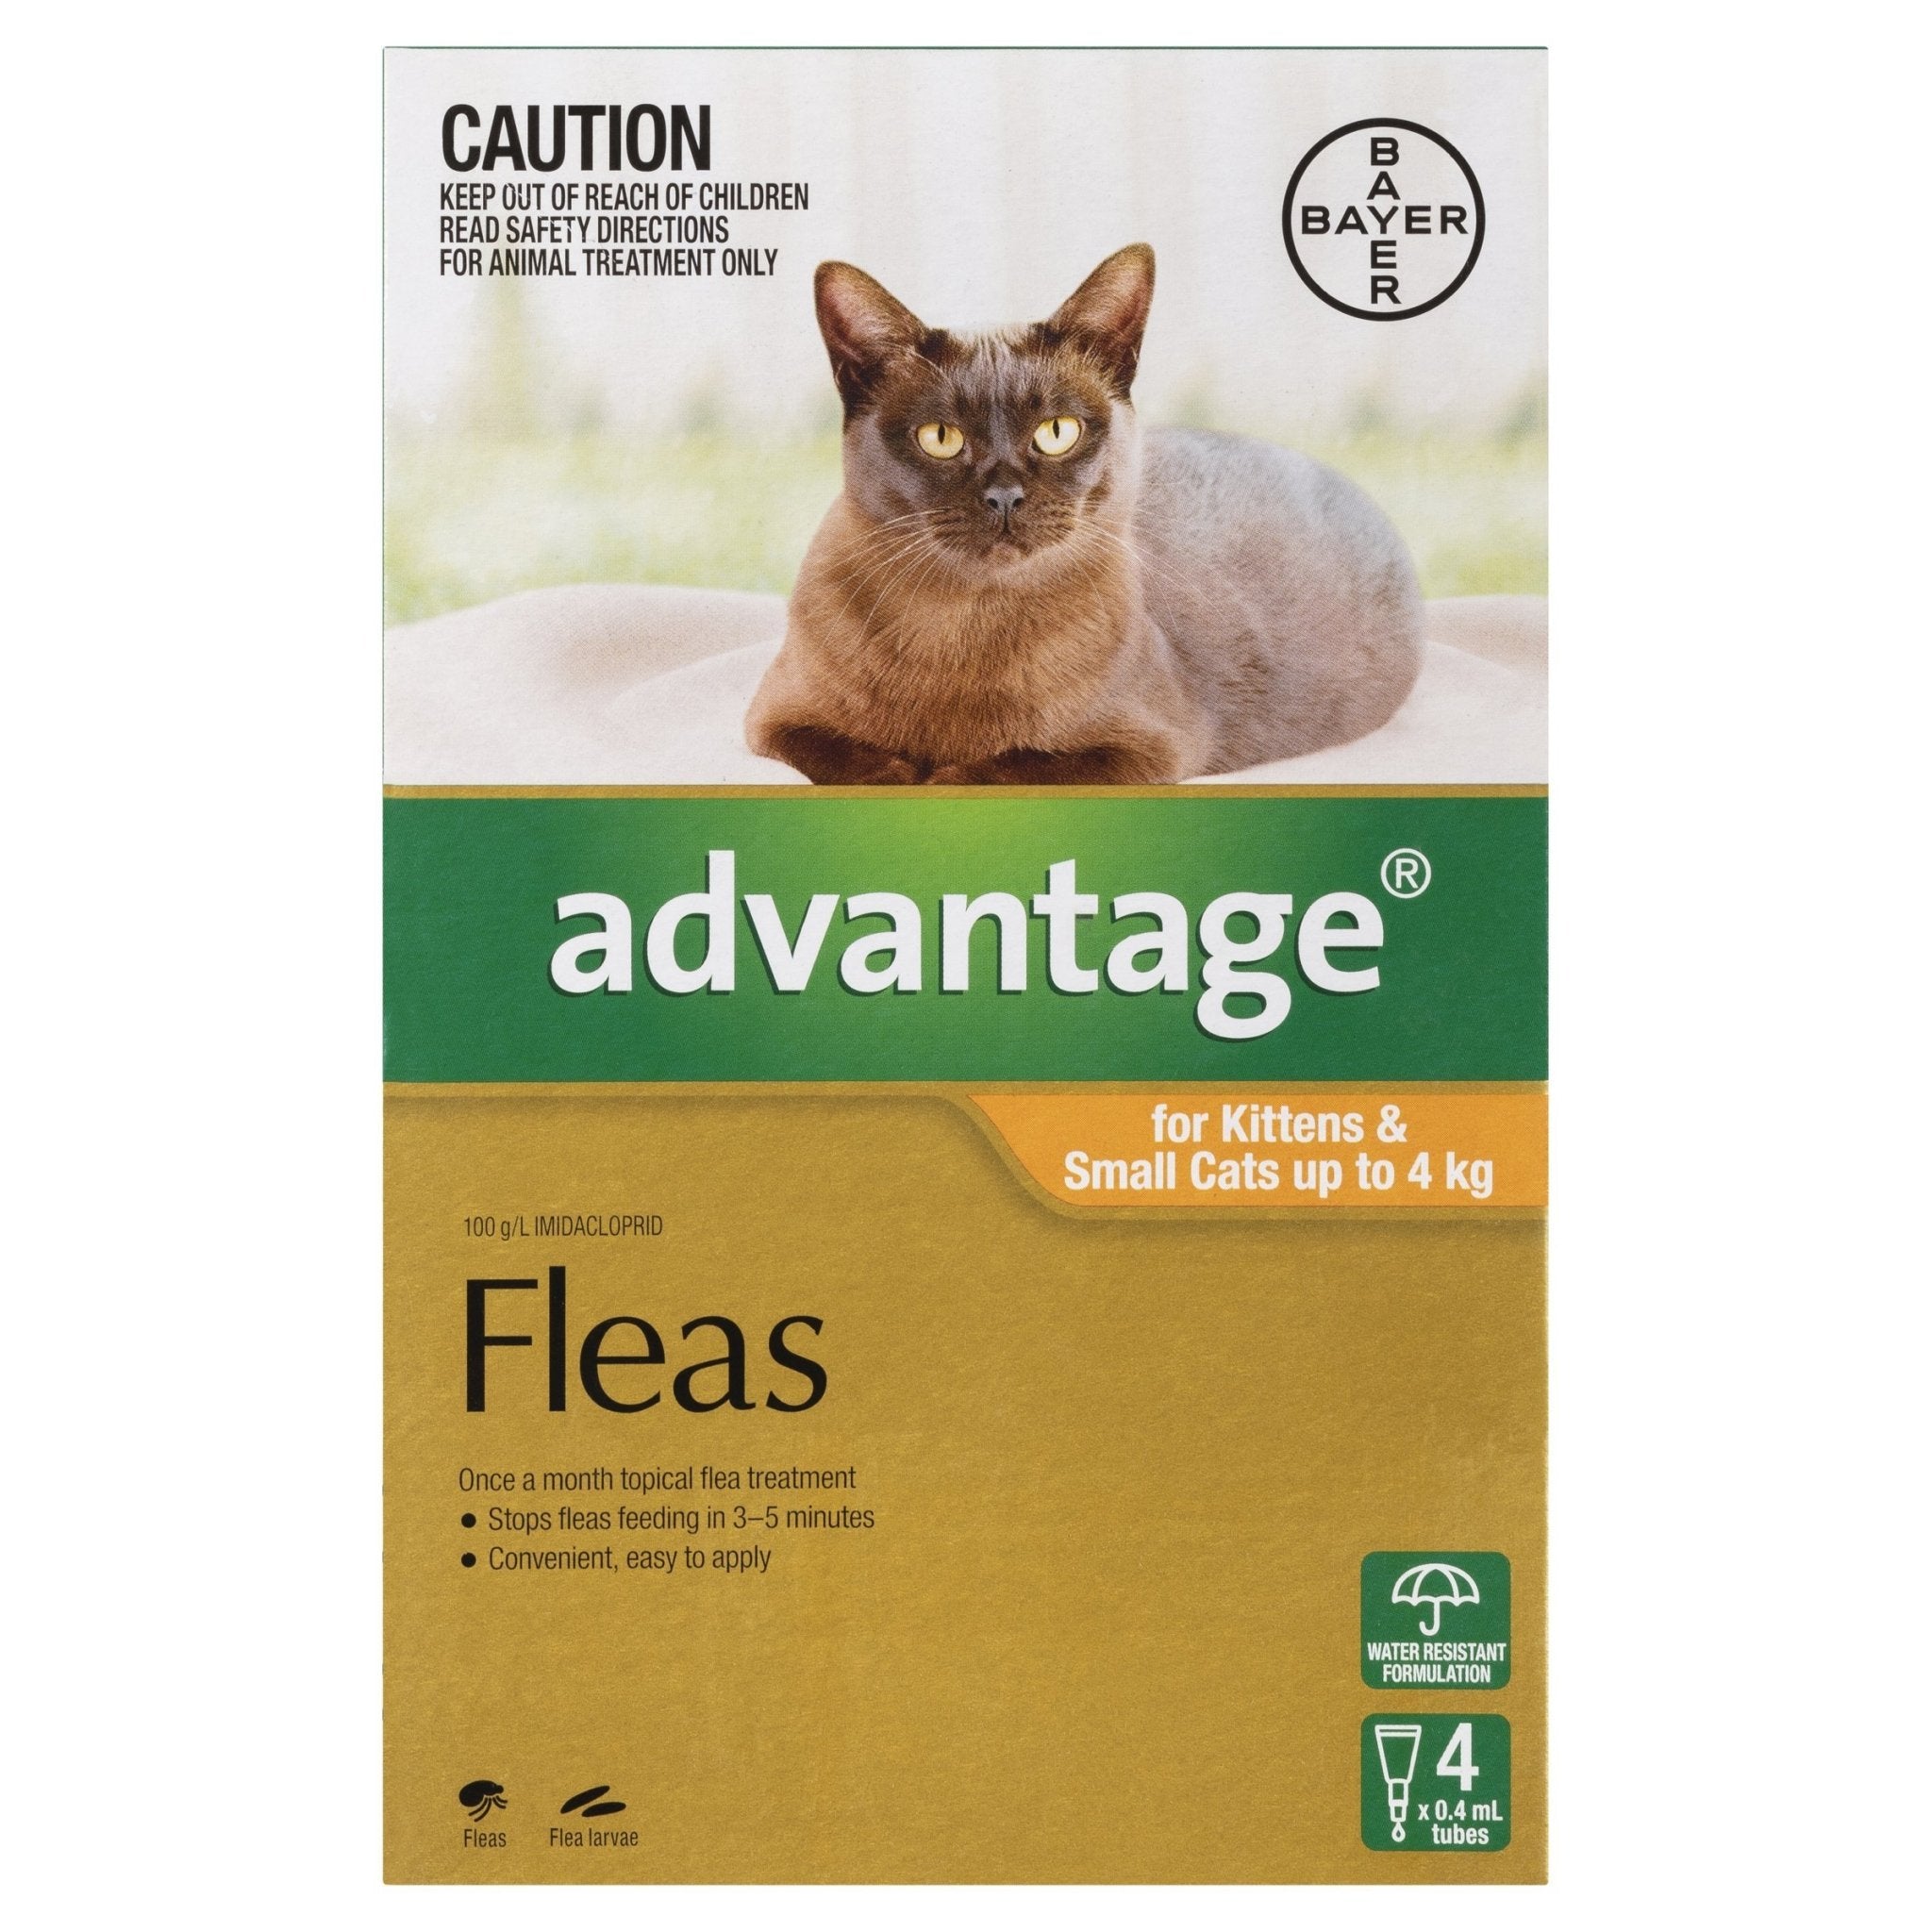 Advantage Fleas For Kittens & Small Cats Up To 4kg